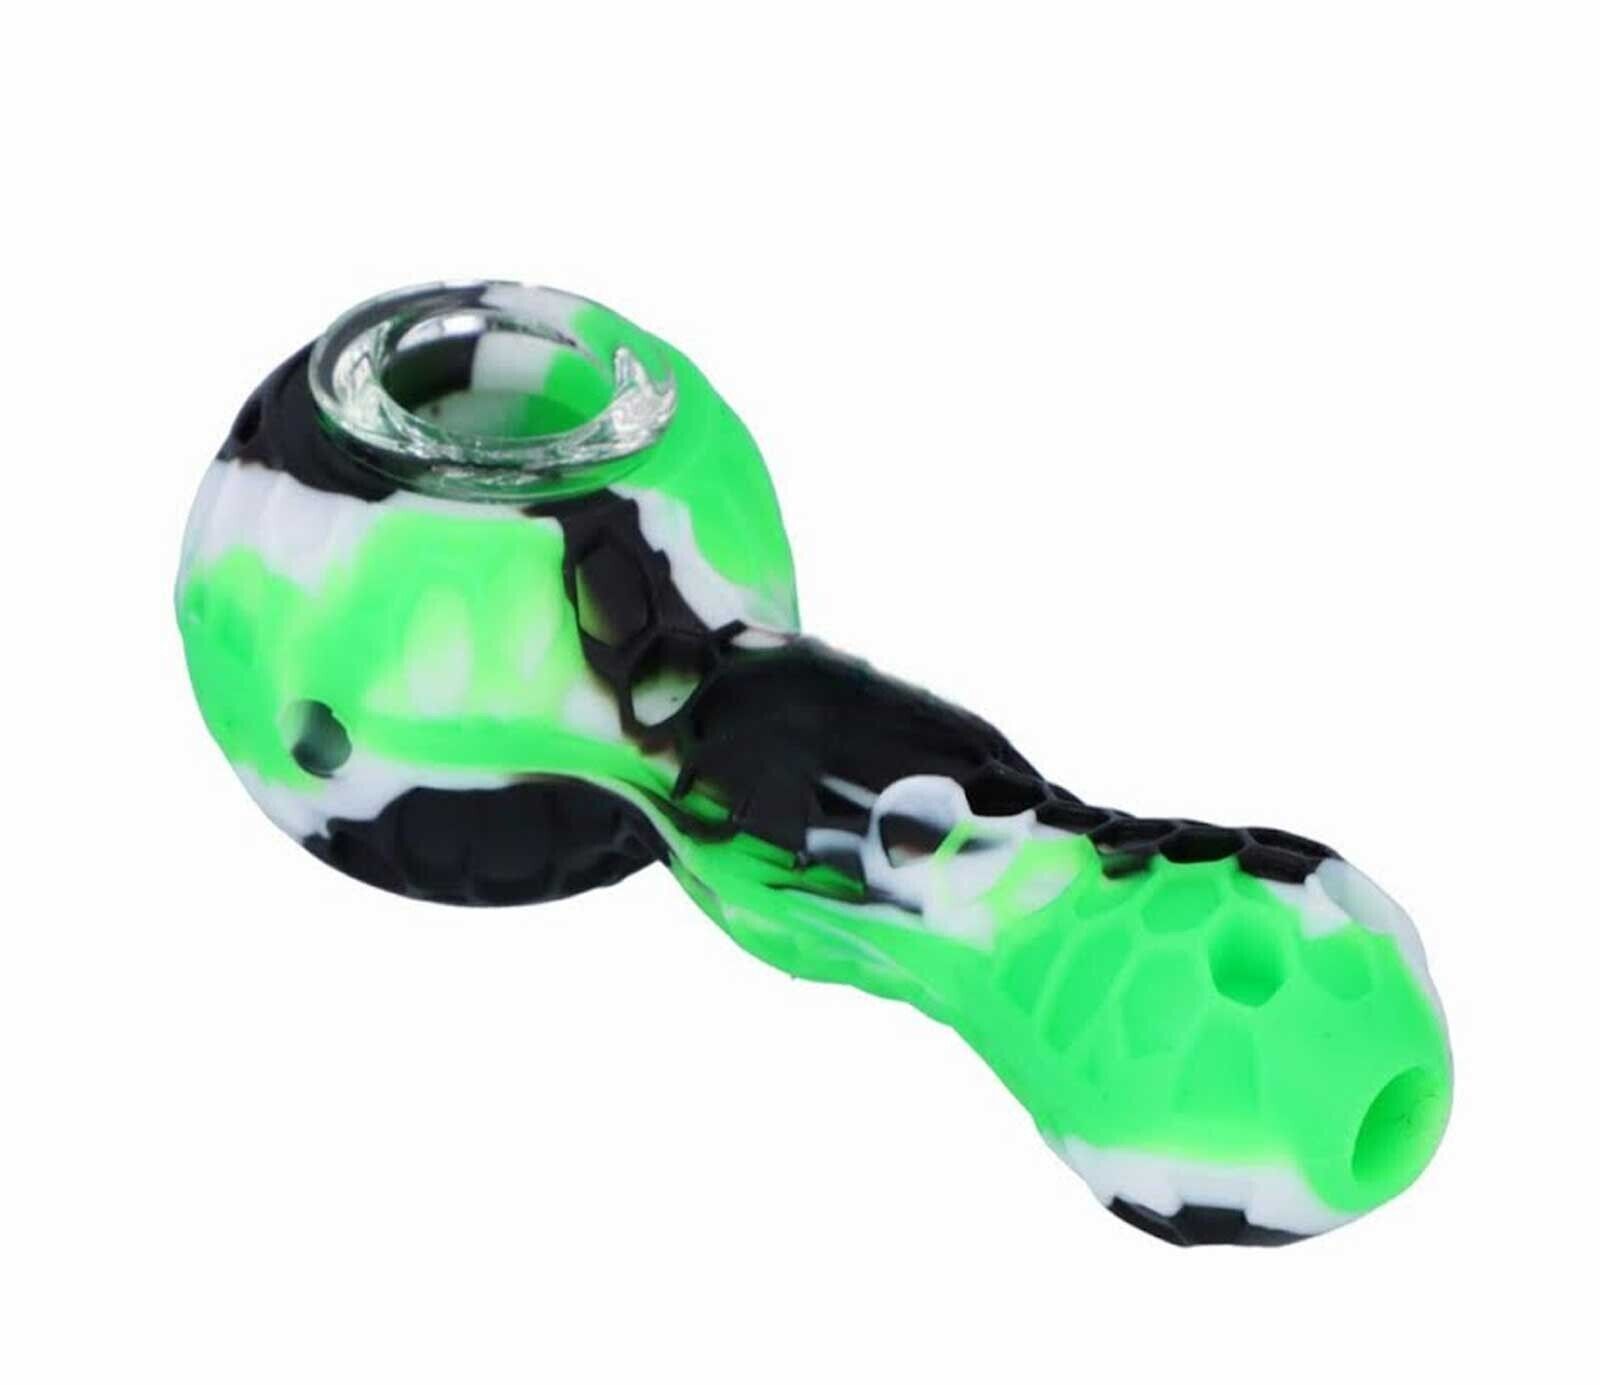 Unbreakable Silicone Tobacco Smoking Pipe w/ Glass Bowl Red Yellow & Green